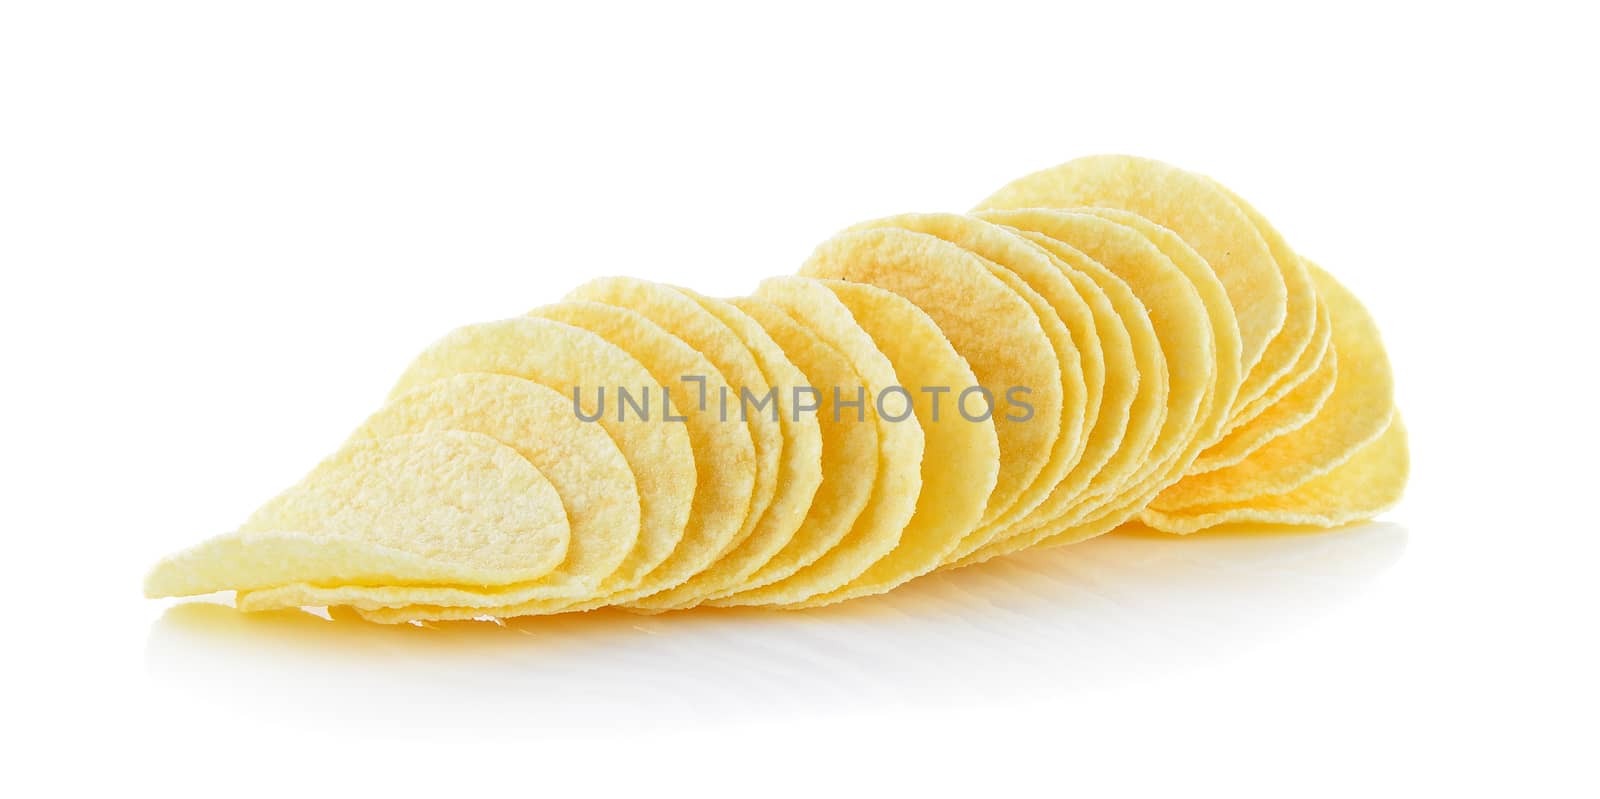 Potato chips on white background by sommai